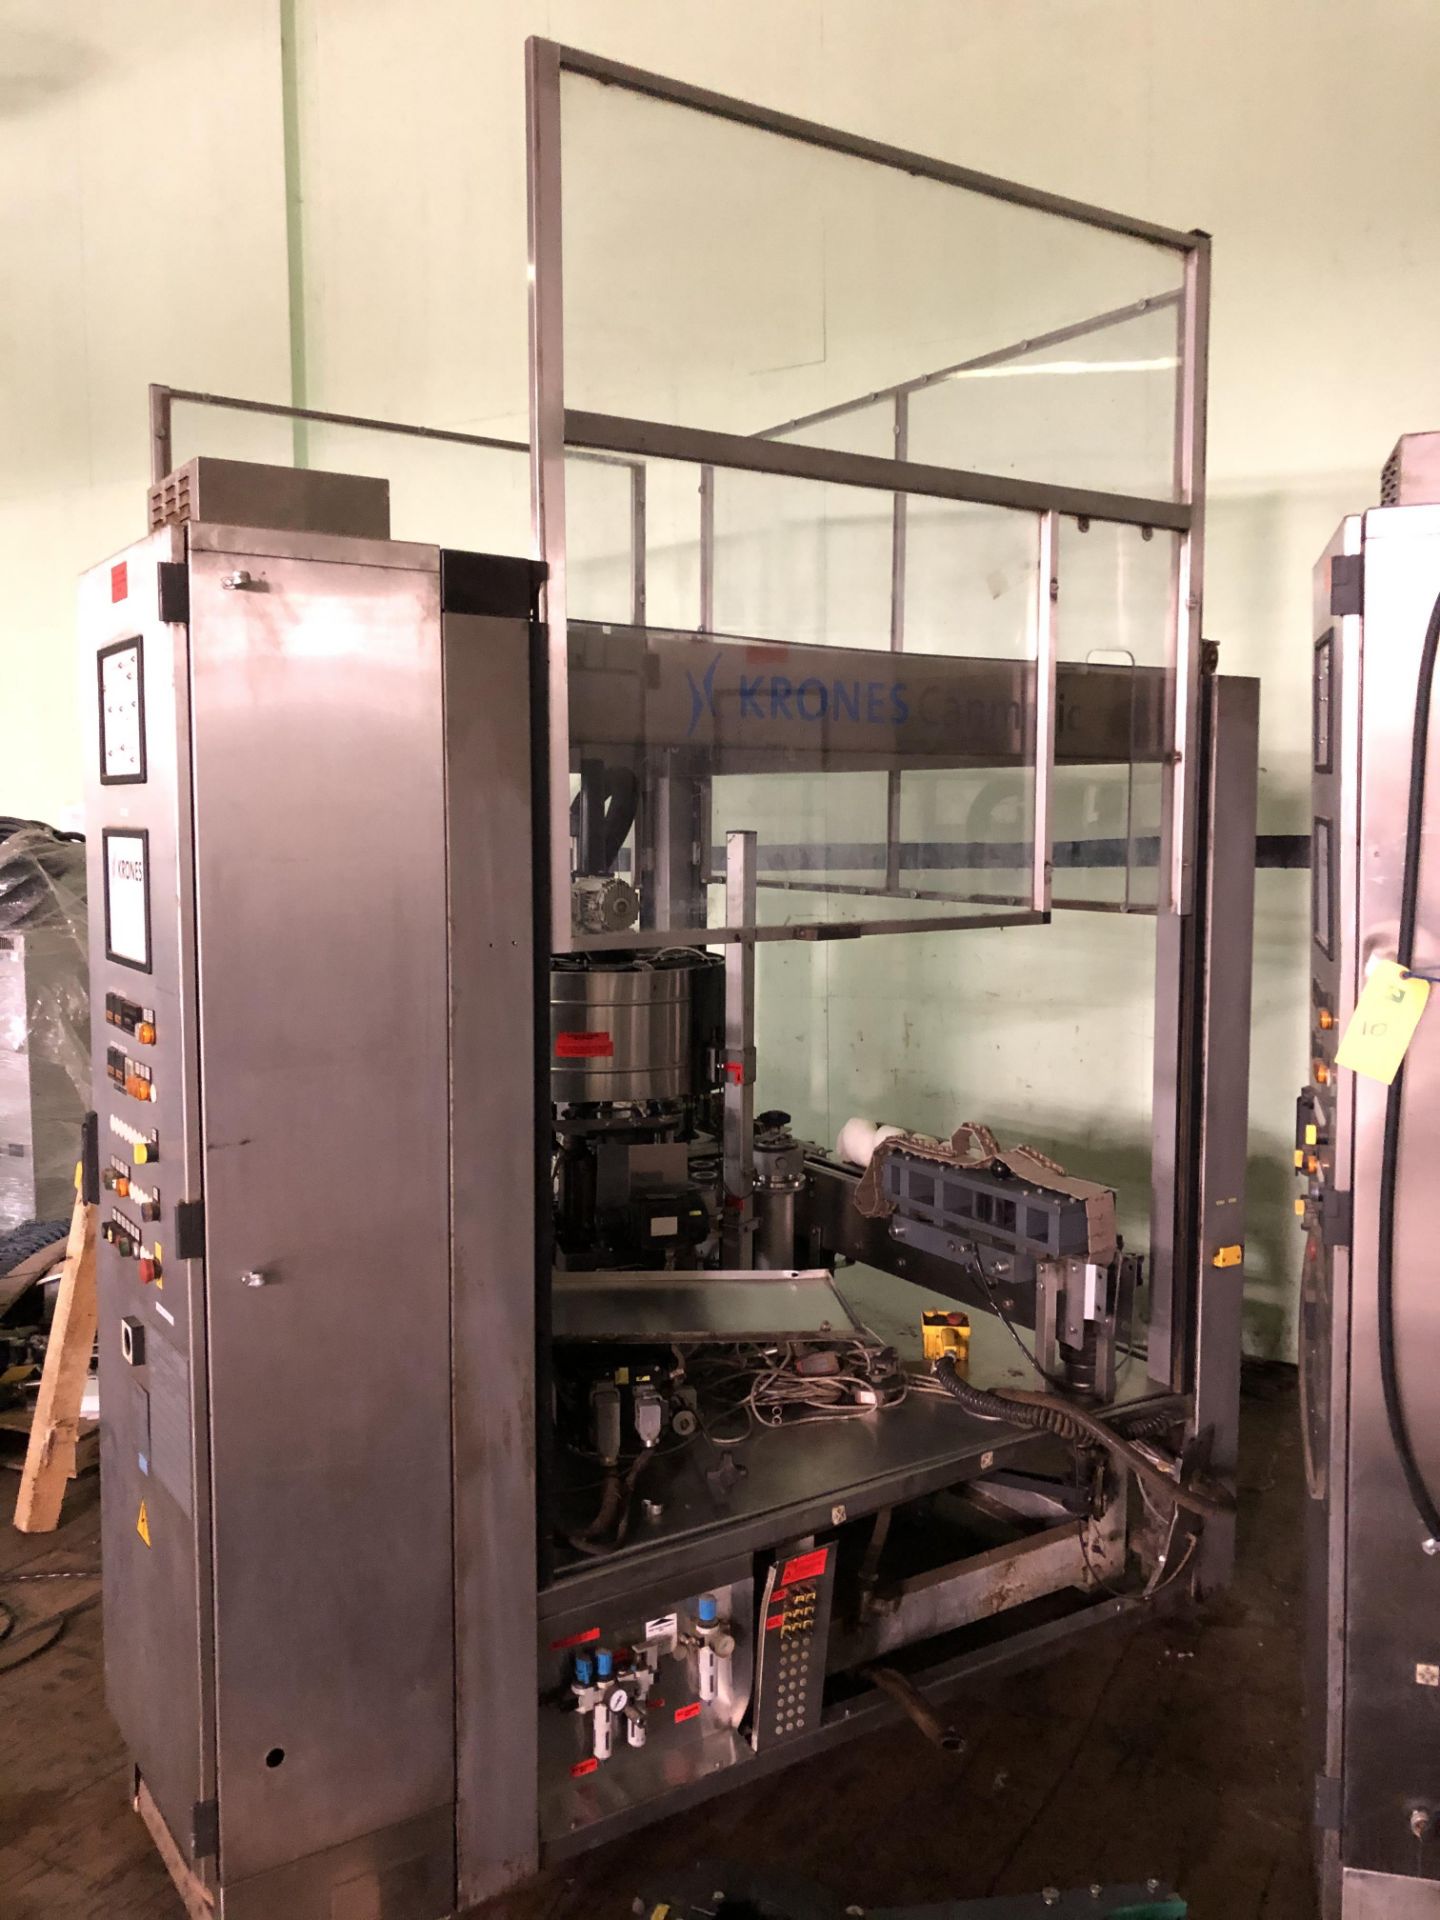 Krones Canmatic Labeler, Machine #073-Q82, RIGGING FEE - $1750 - Image 2 of 3